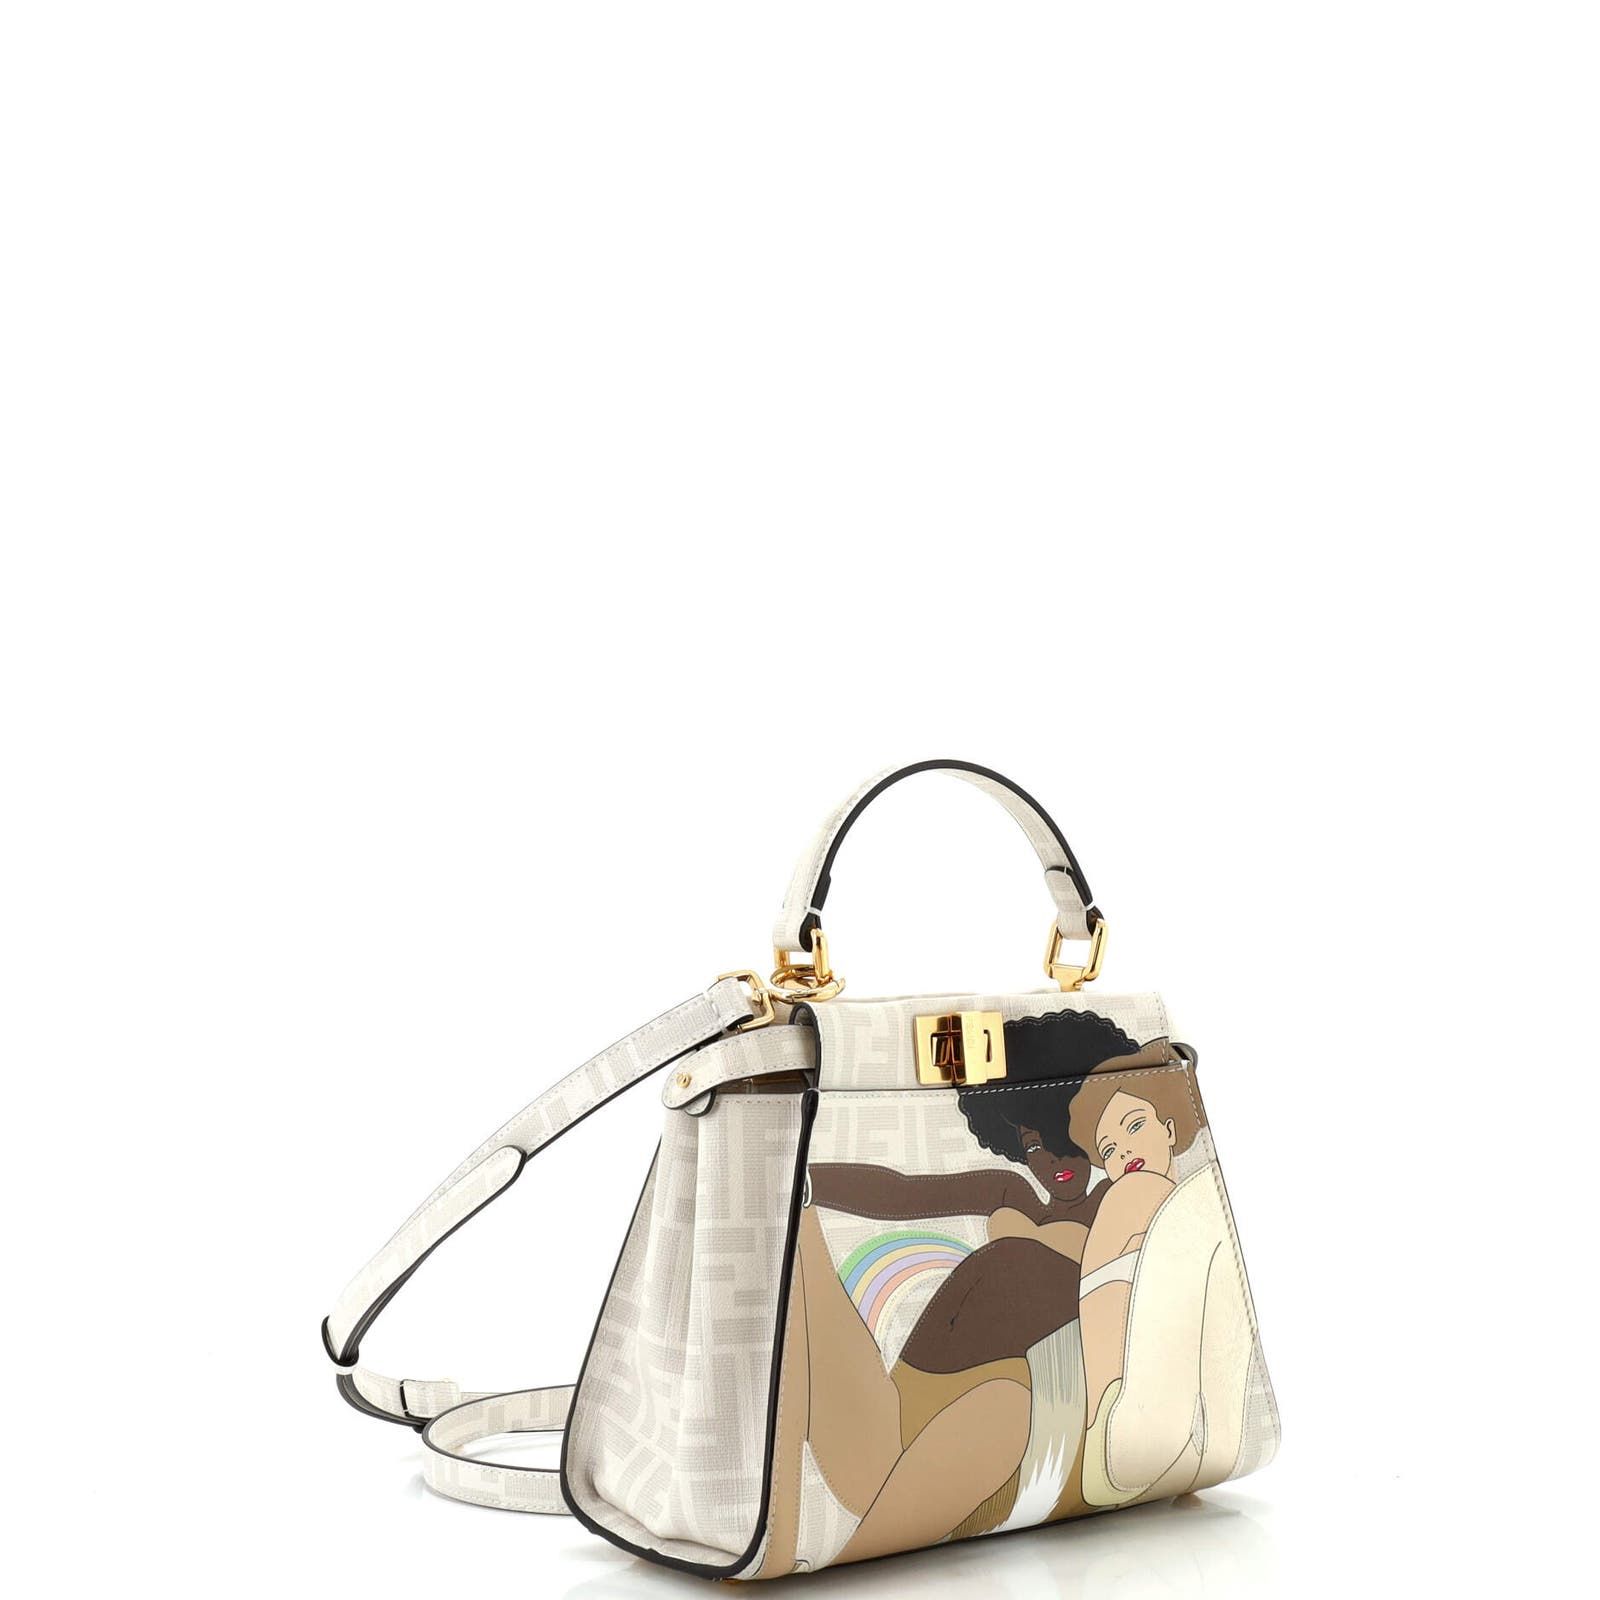 Fendi Antonio Lopez Peekaboo Bag Zucca Coated Canvas with Printed Size ONE SIZE - 2 Preview